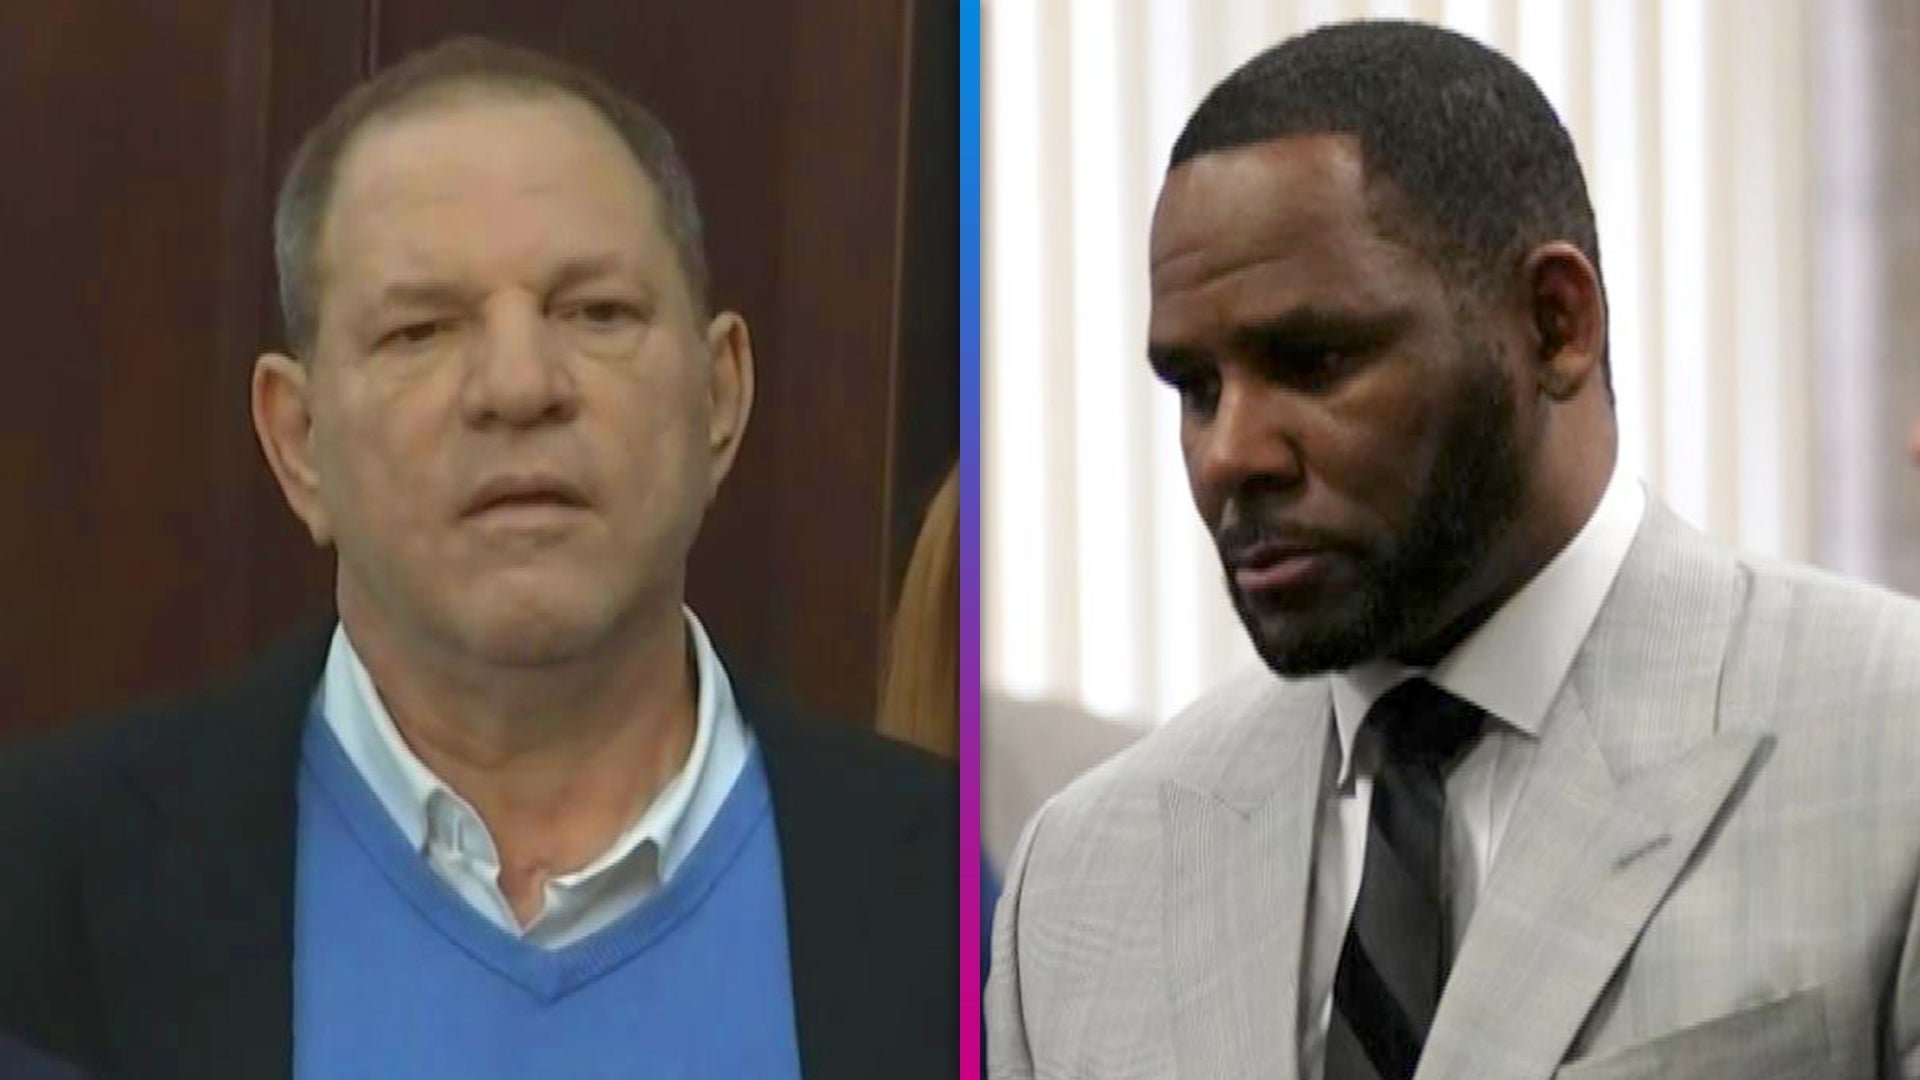 R. Kelly and Harvey Weinstein: Inside Their Latest Legal Woes